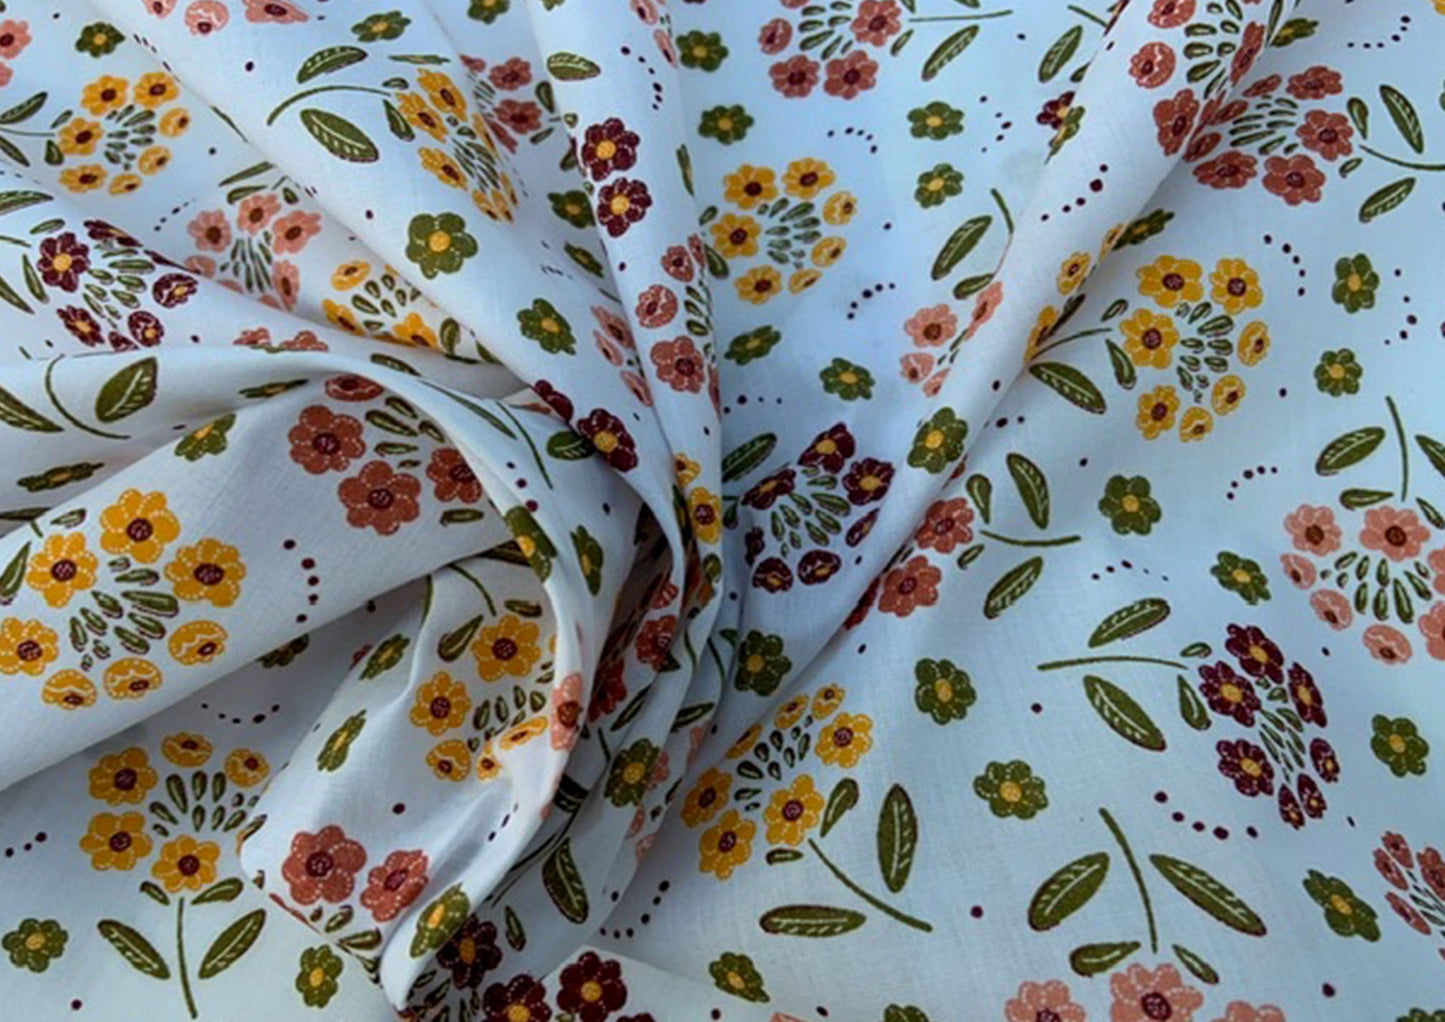 Floral polycotton print, brown and mustard on white